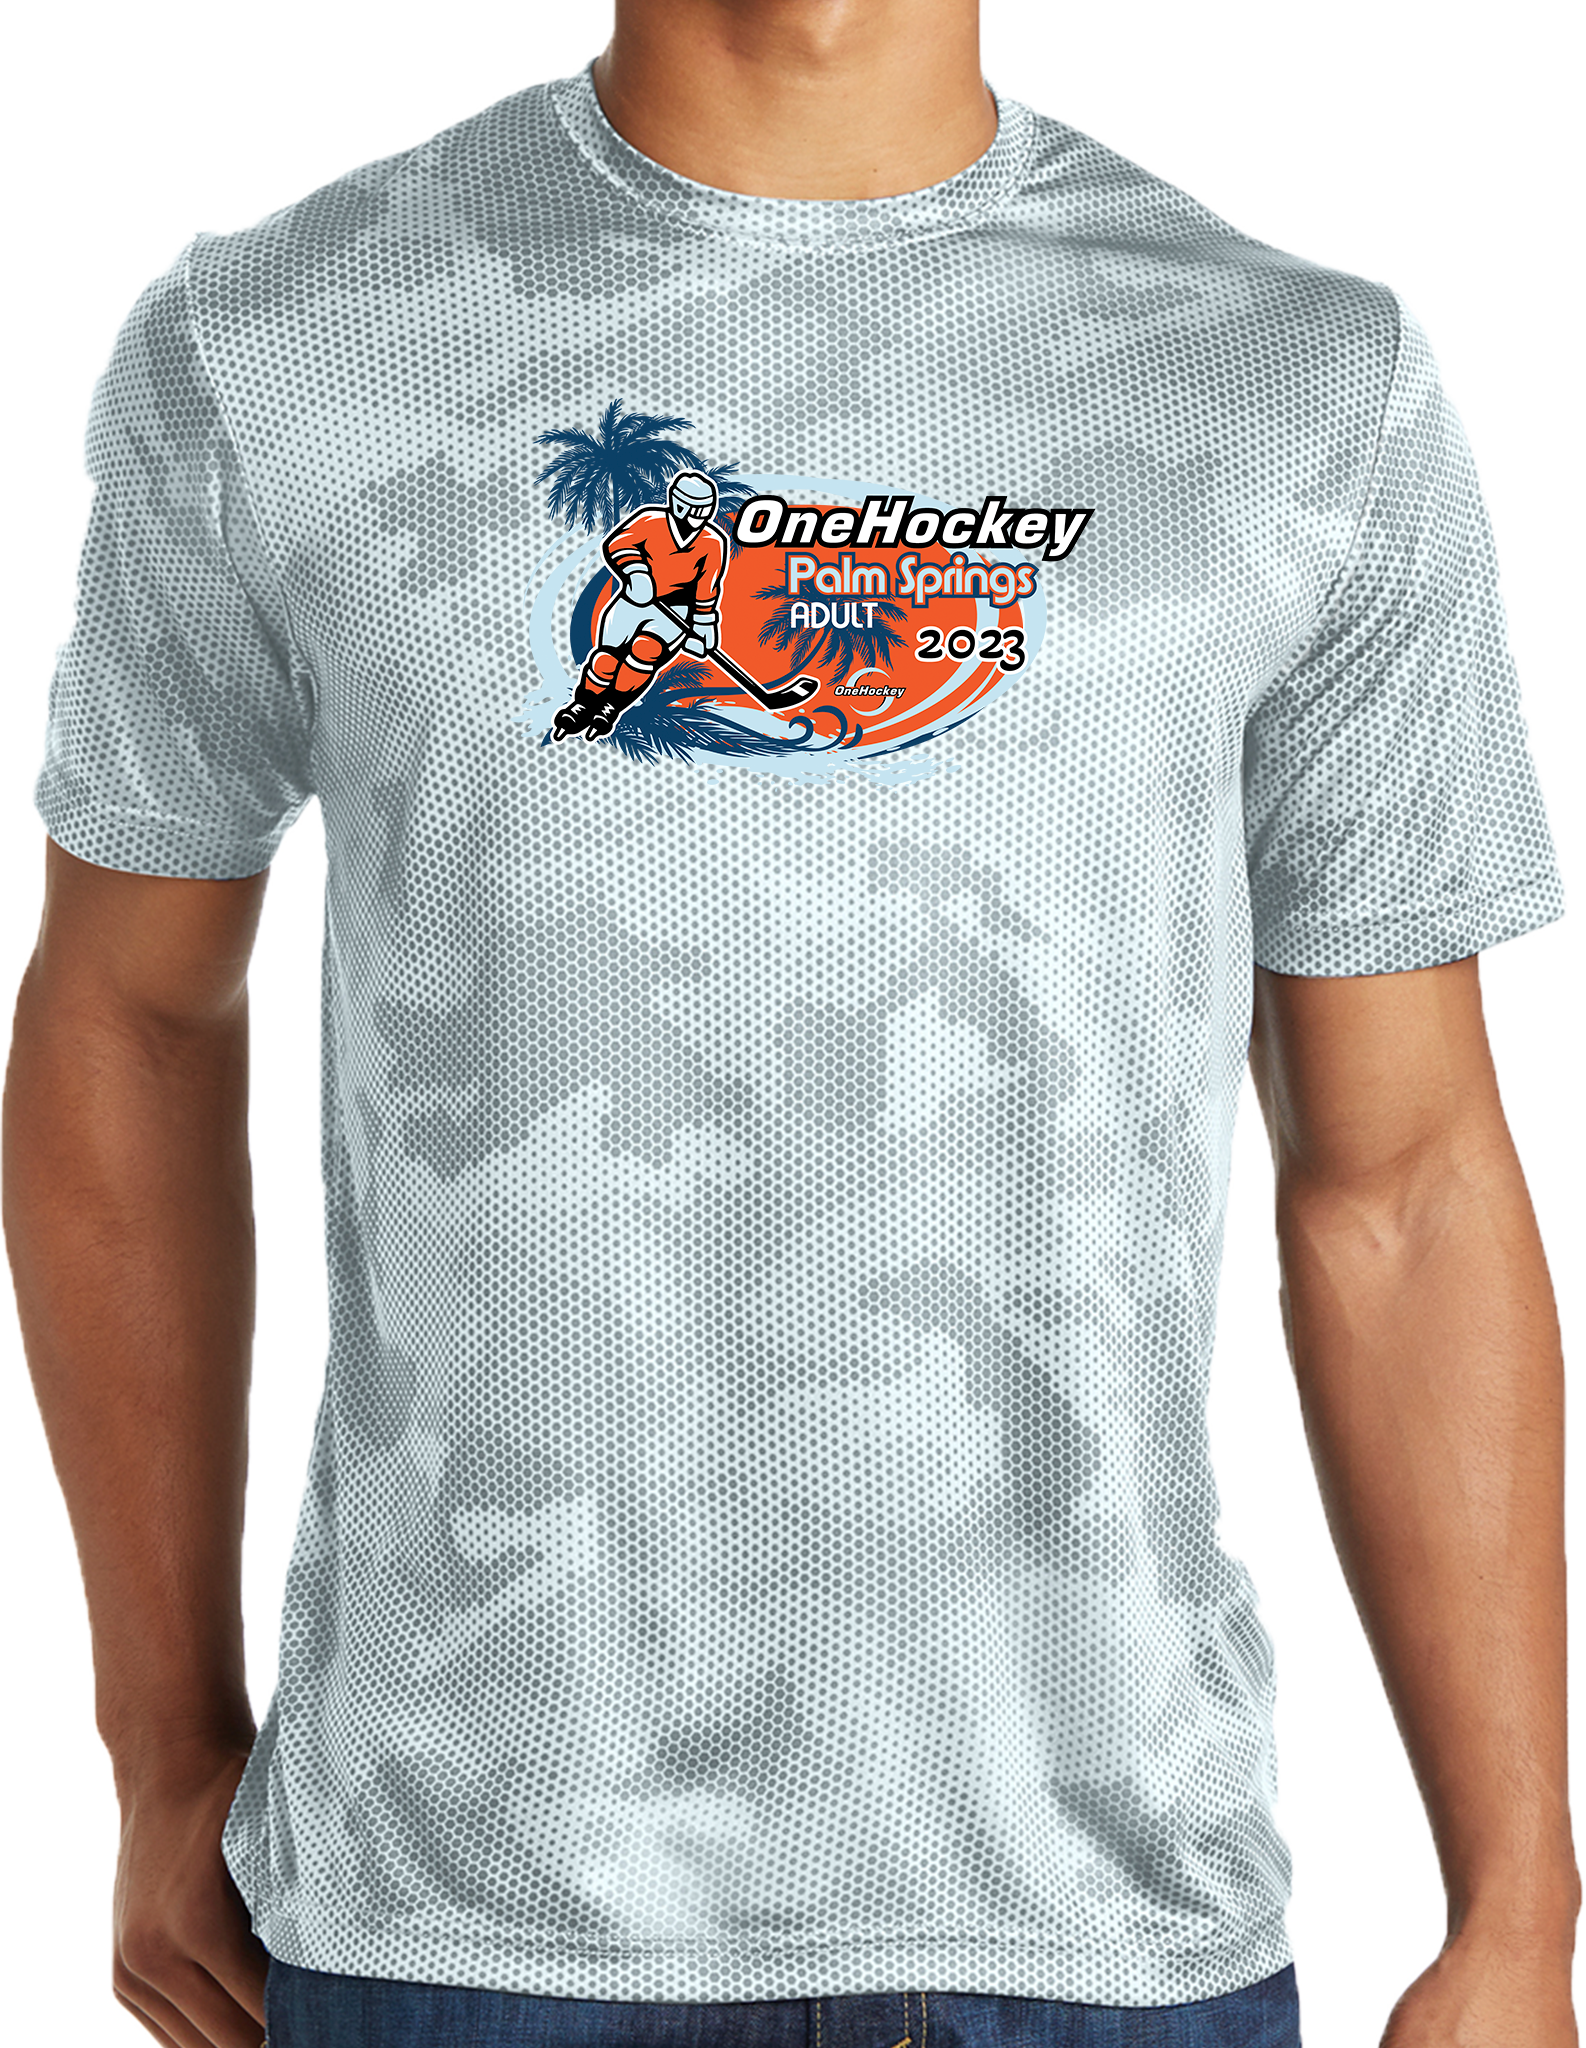 PERFORMANCE SHIRTS - 2023 OneHockey Palm Springs Adult